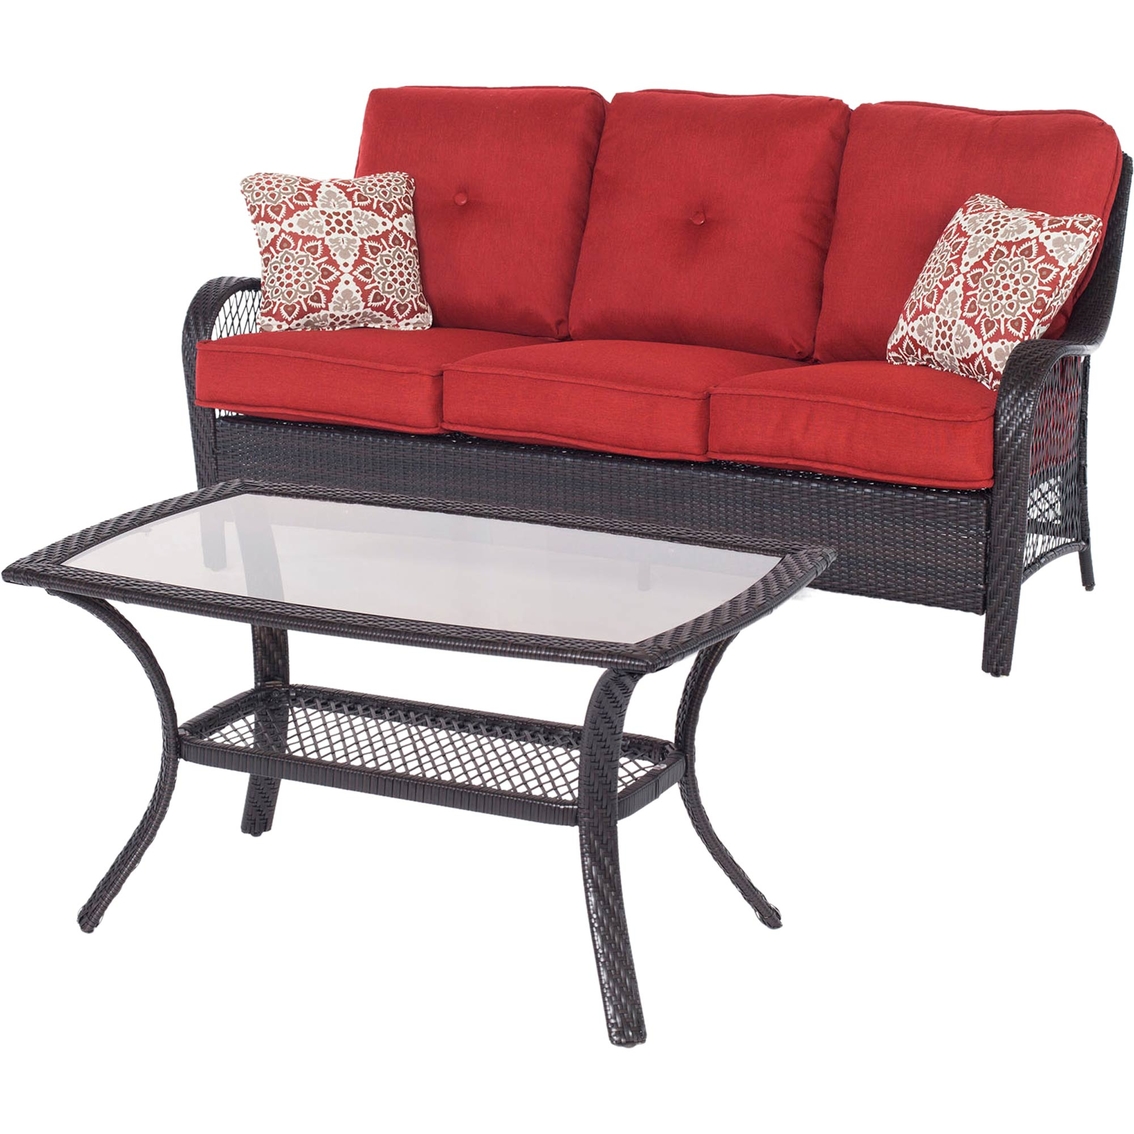 Hanover Orleans 4 pc. All Weather Patio Set - Image 2 of 4